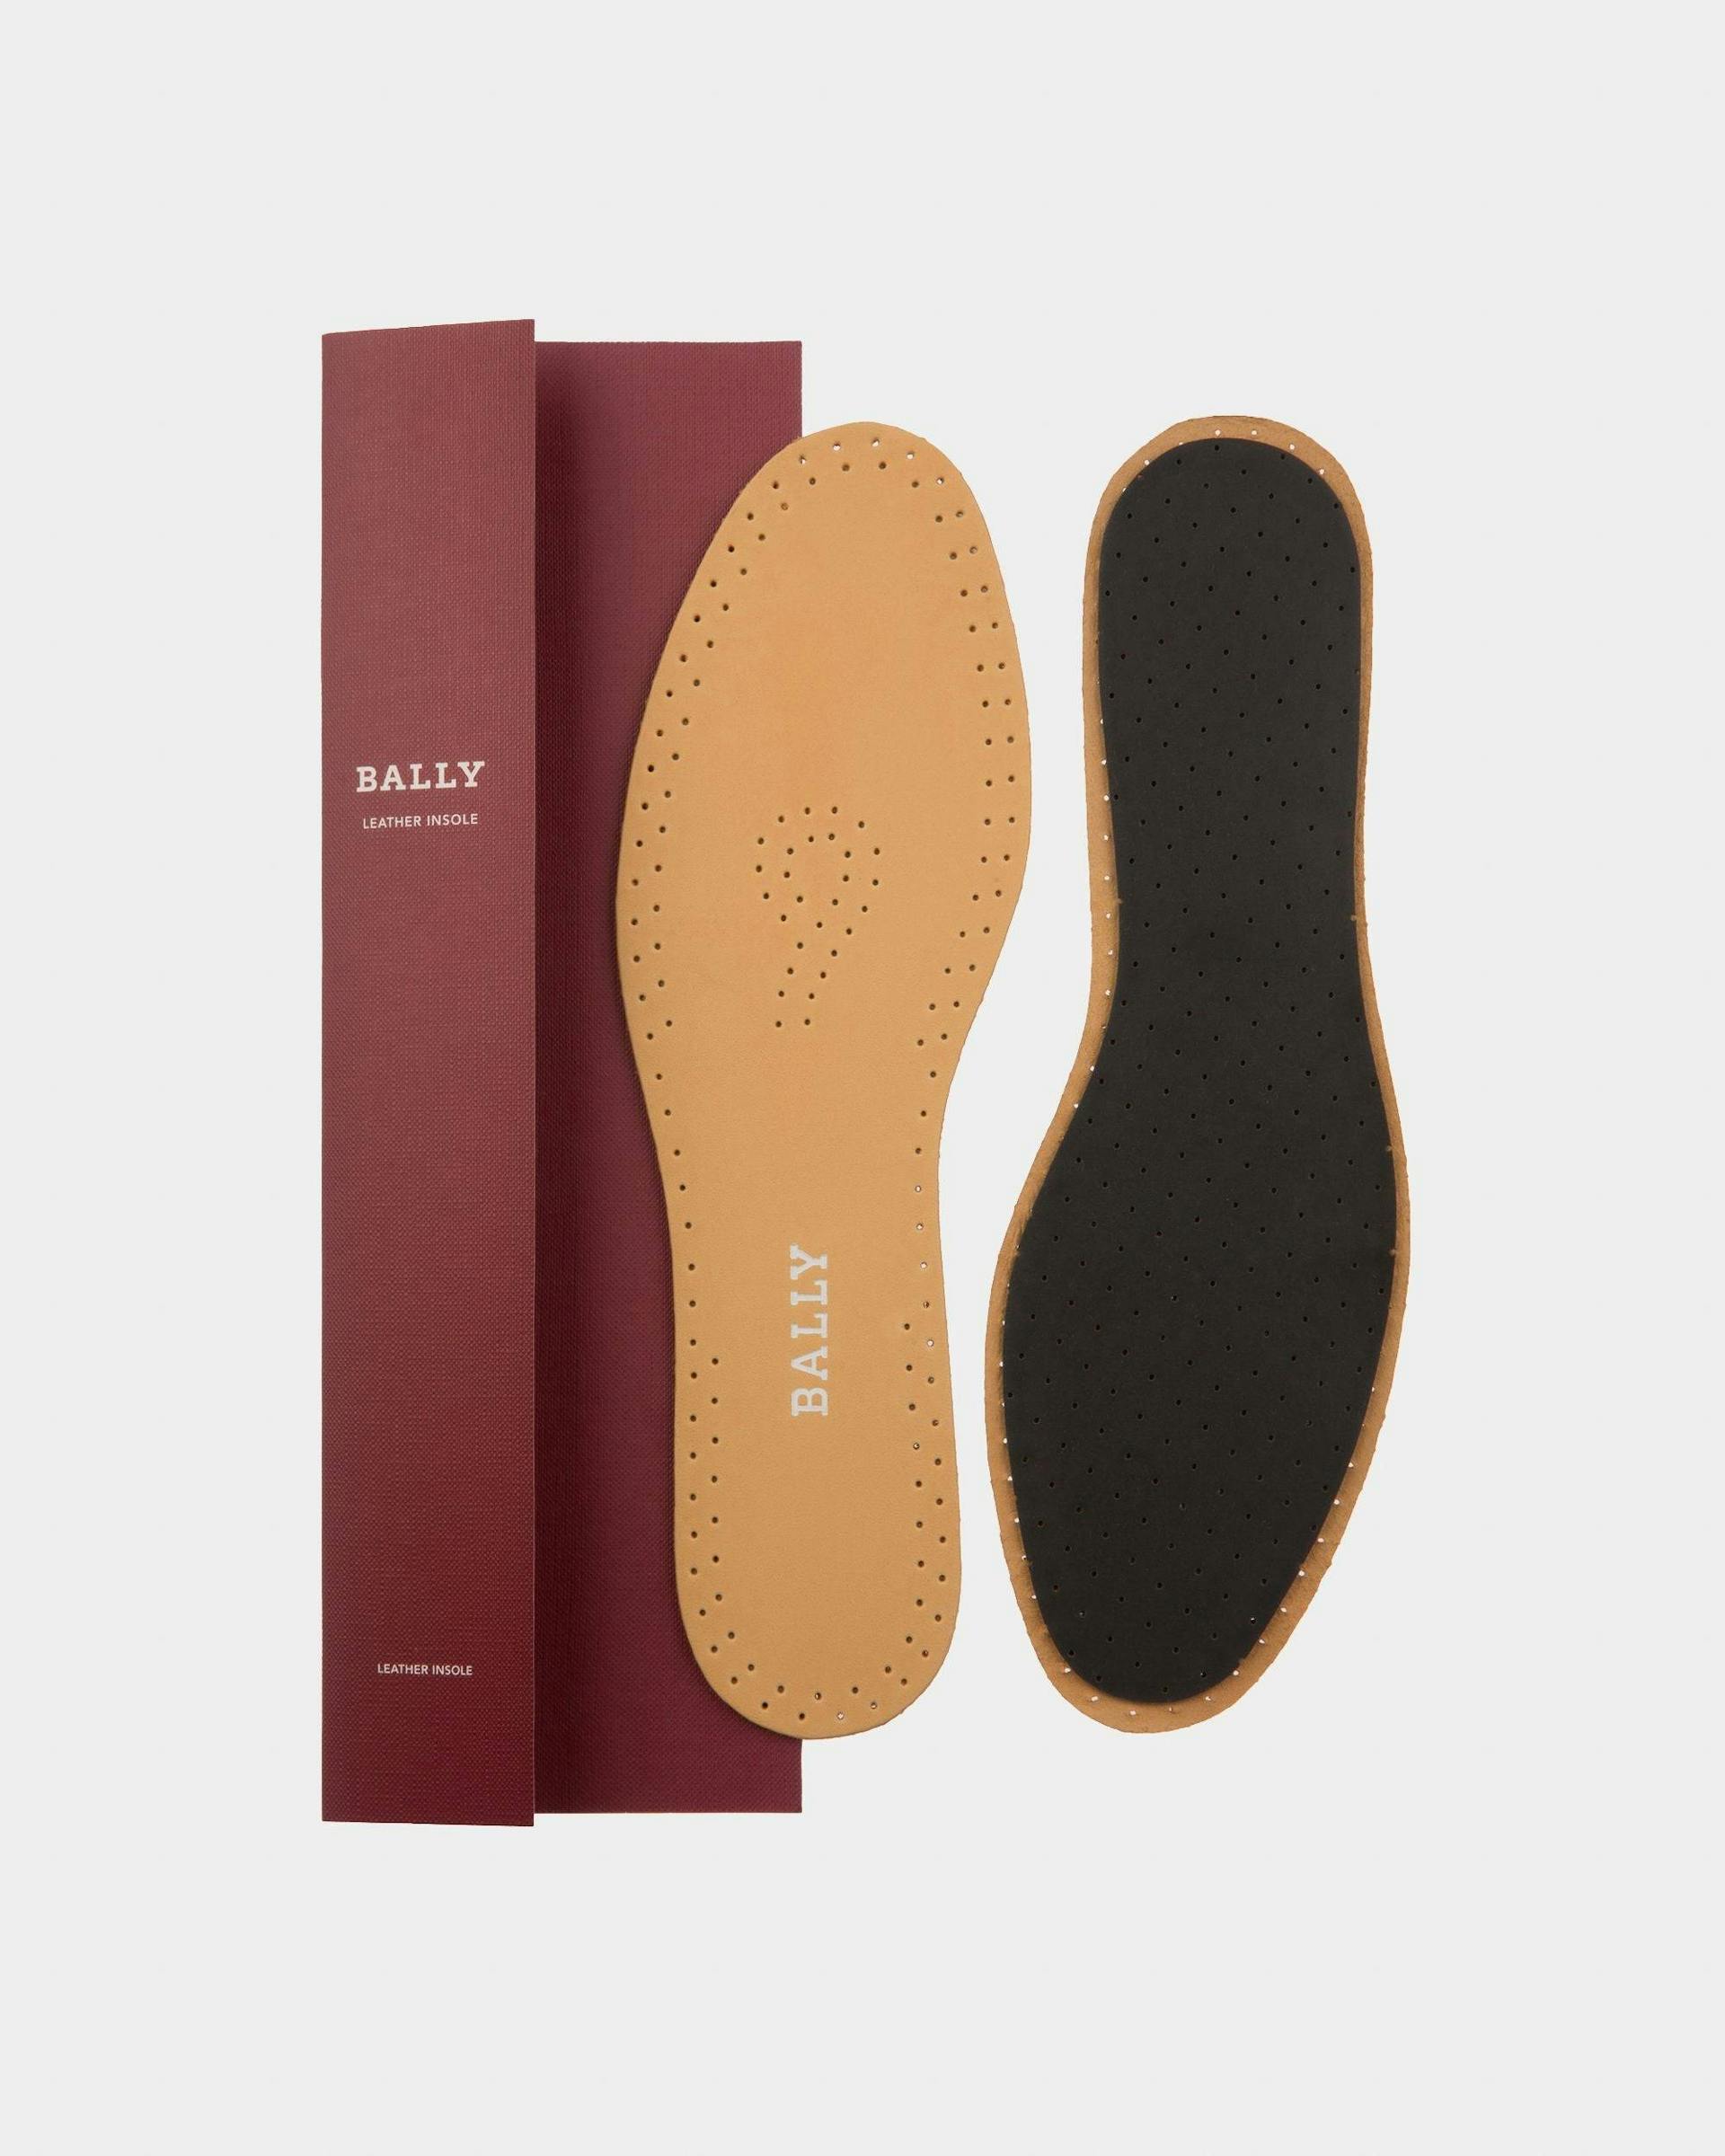 Leather Insole Shoe Care Accessory For All Shoes - Homme - Bally - 01